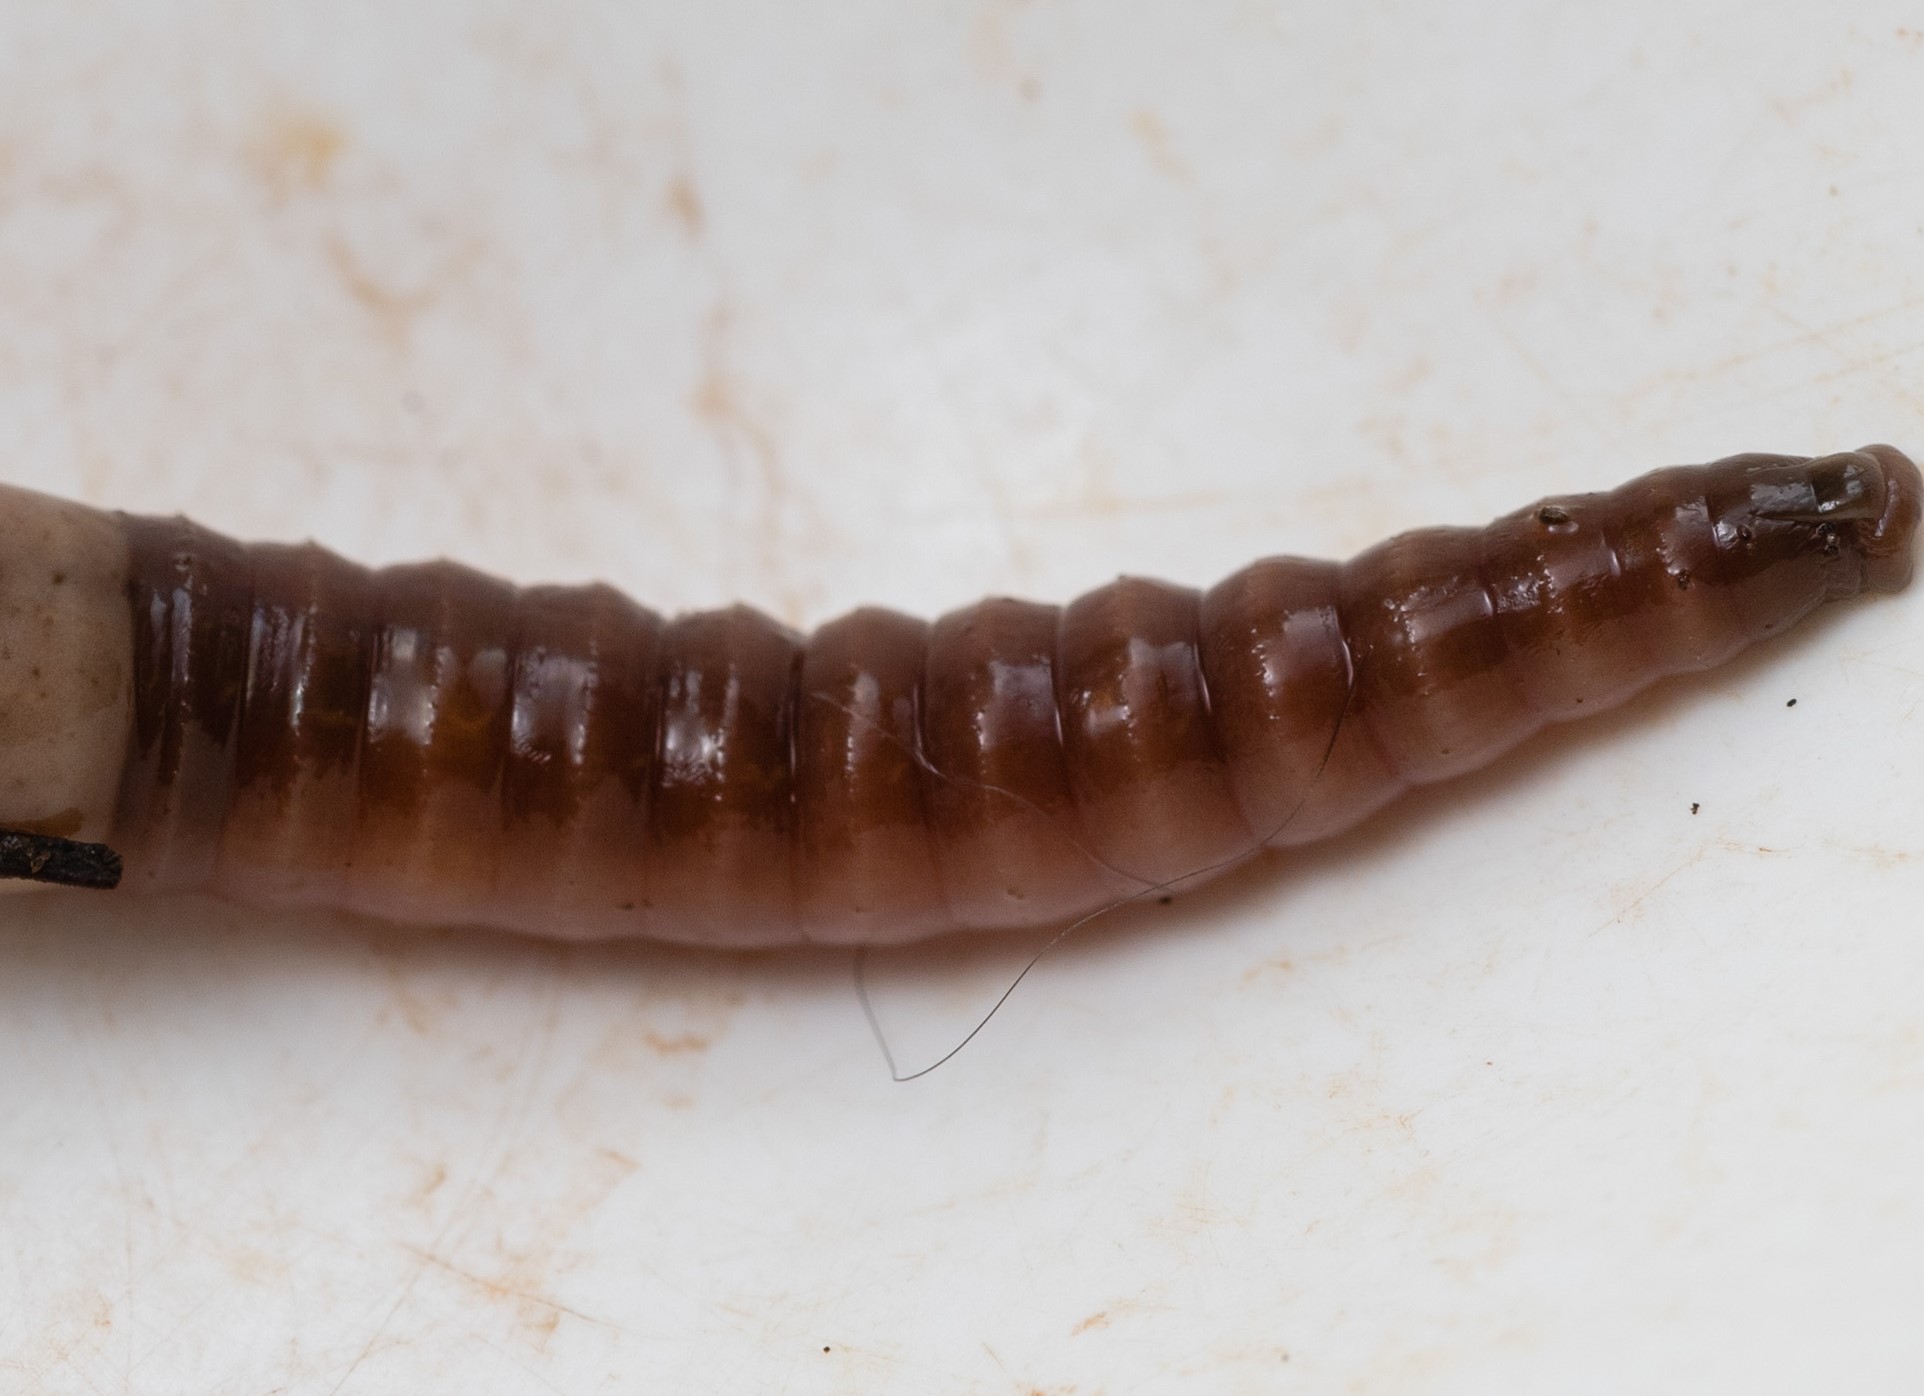 Asian Jumping Worm: A Threat to Healthy Landscapes